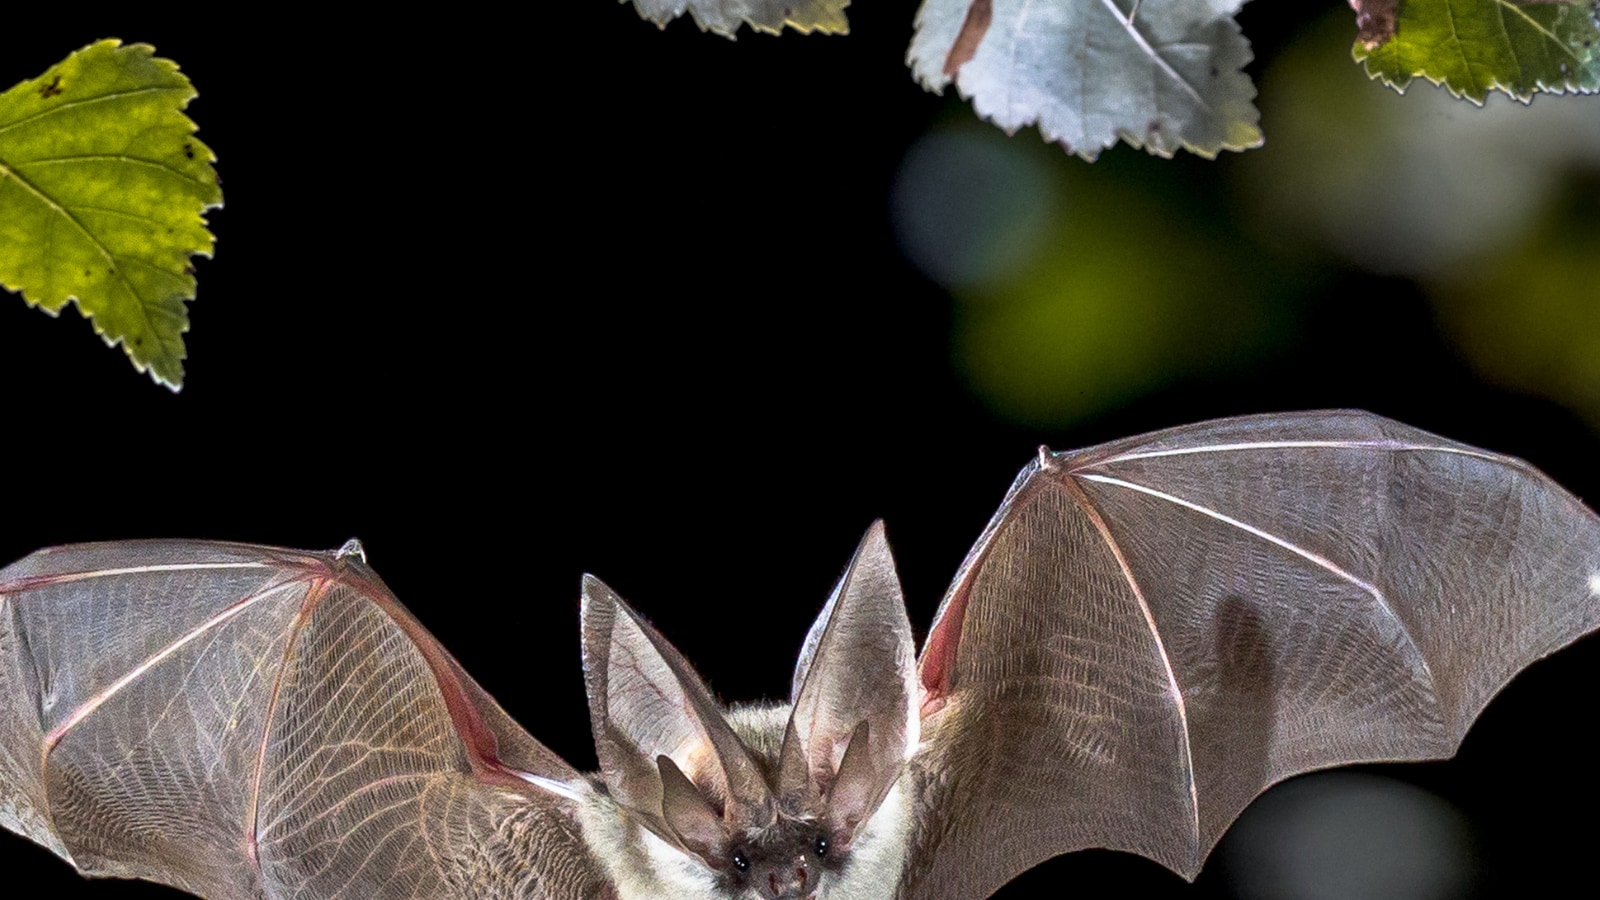 Bats Go Out to Hunt in Groups, Just like Other Mammals: Study